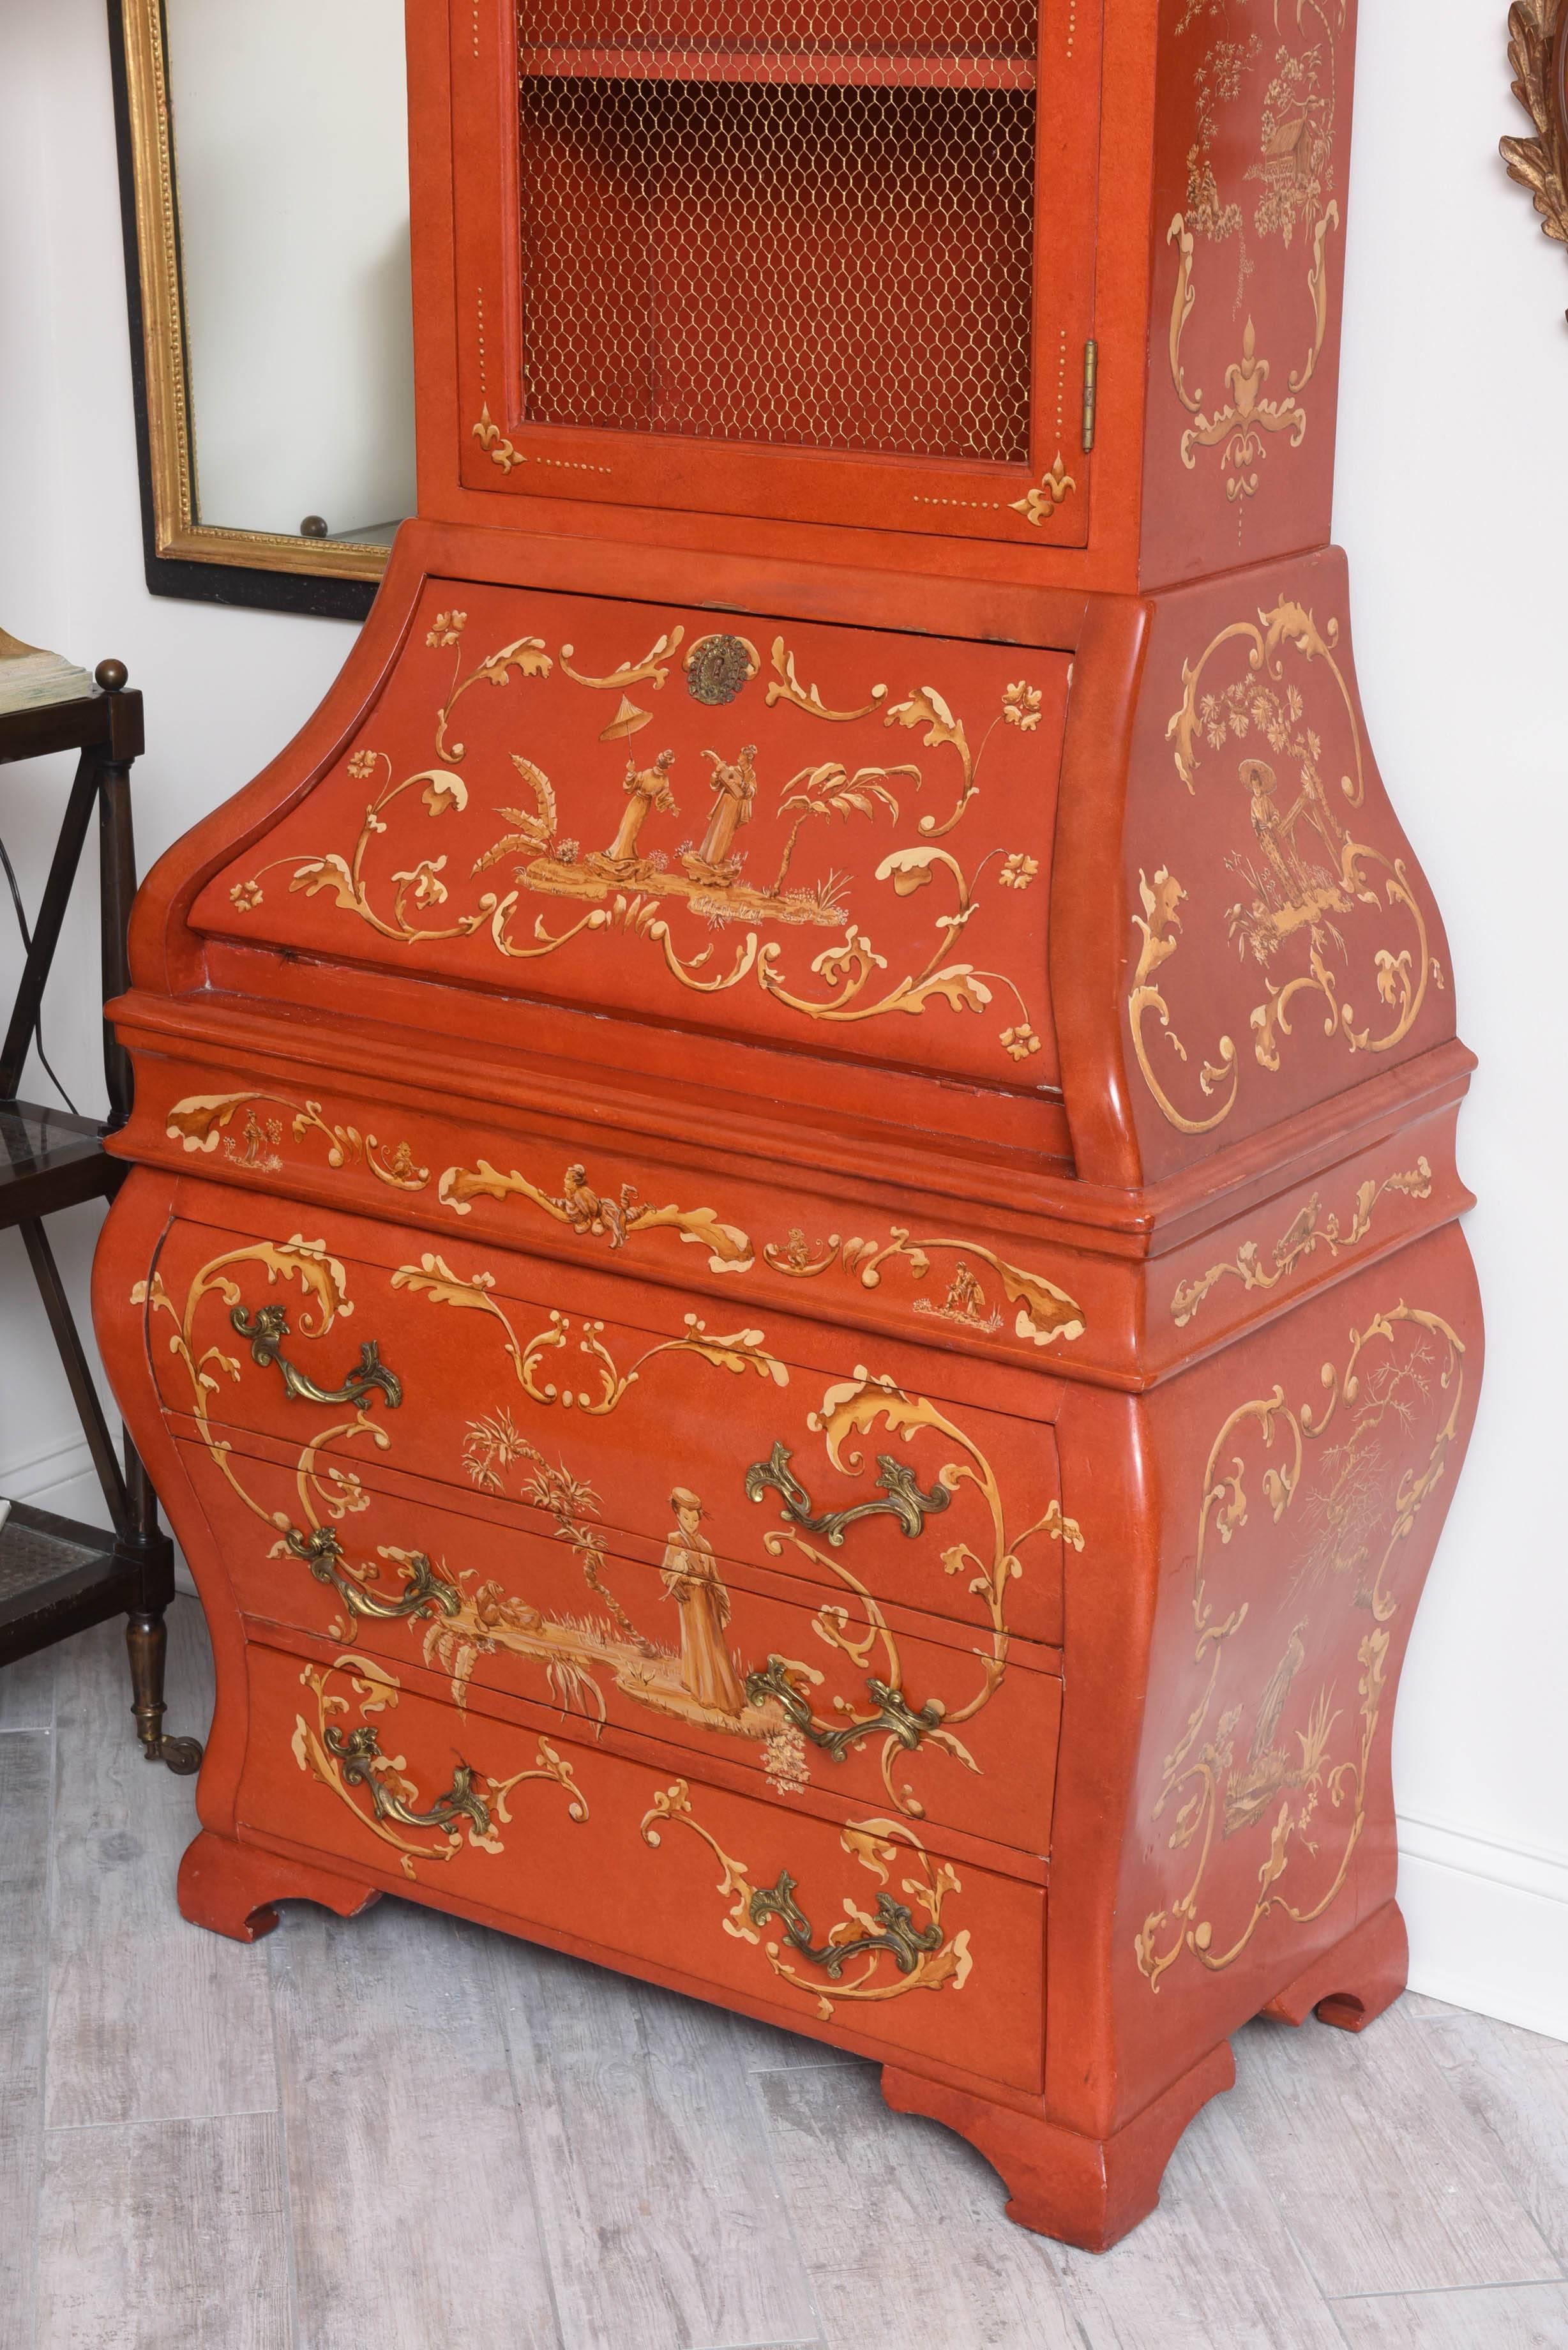 Striking chinoiserie secretary with exquisite hand-painted surfaces by the Isabel O'Neil Studio.